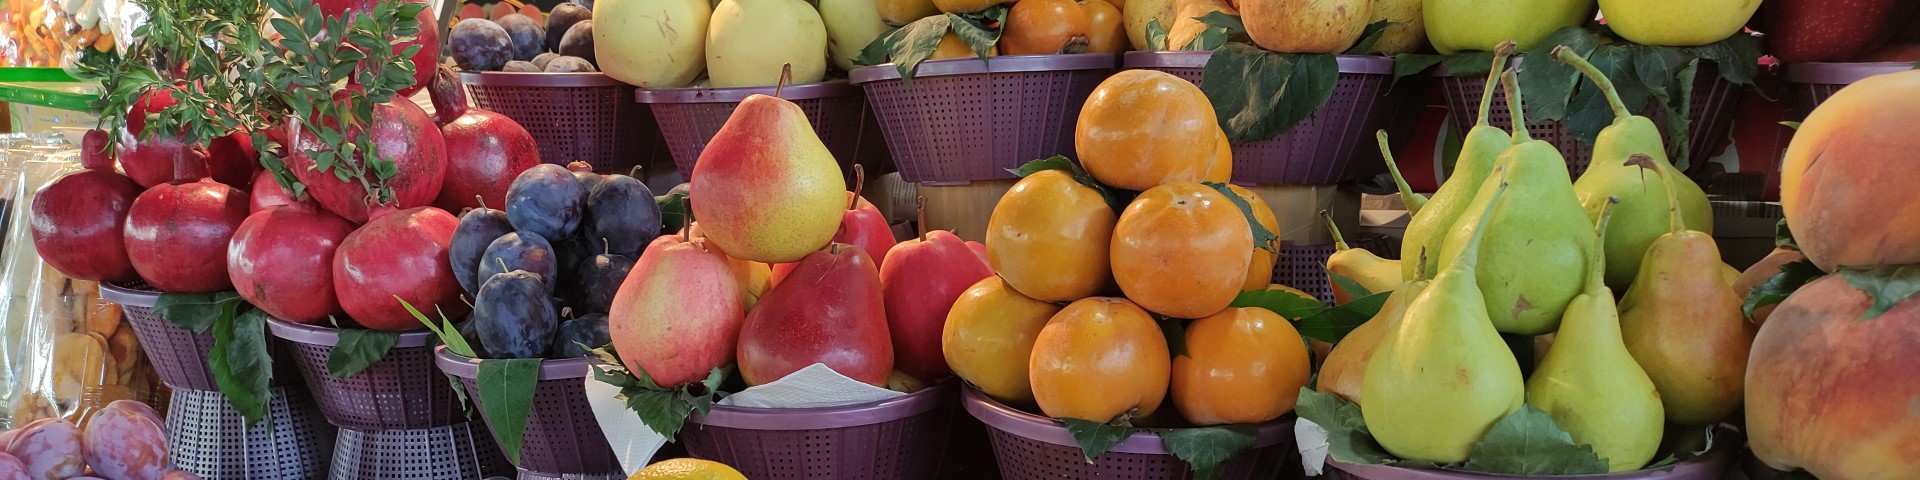 Different fruits are placed next to each other in baskets.